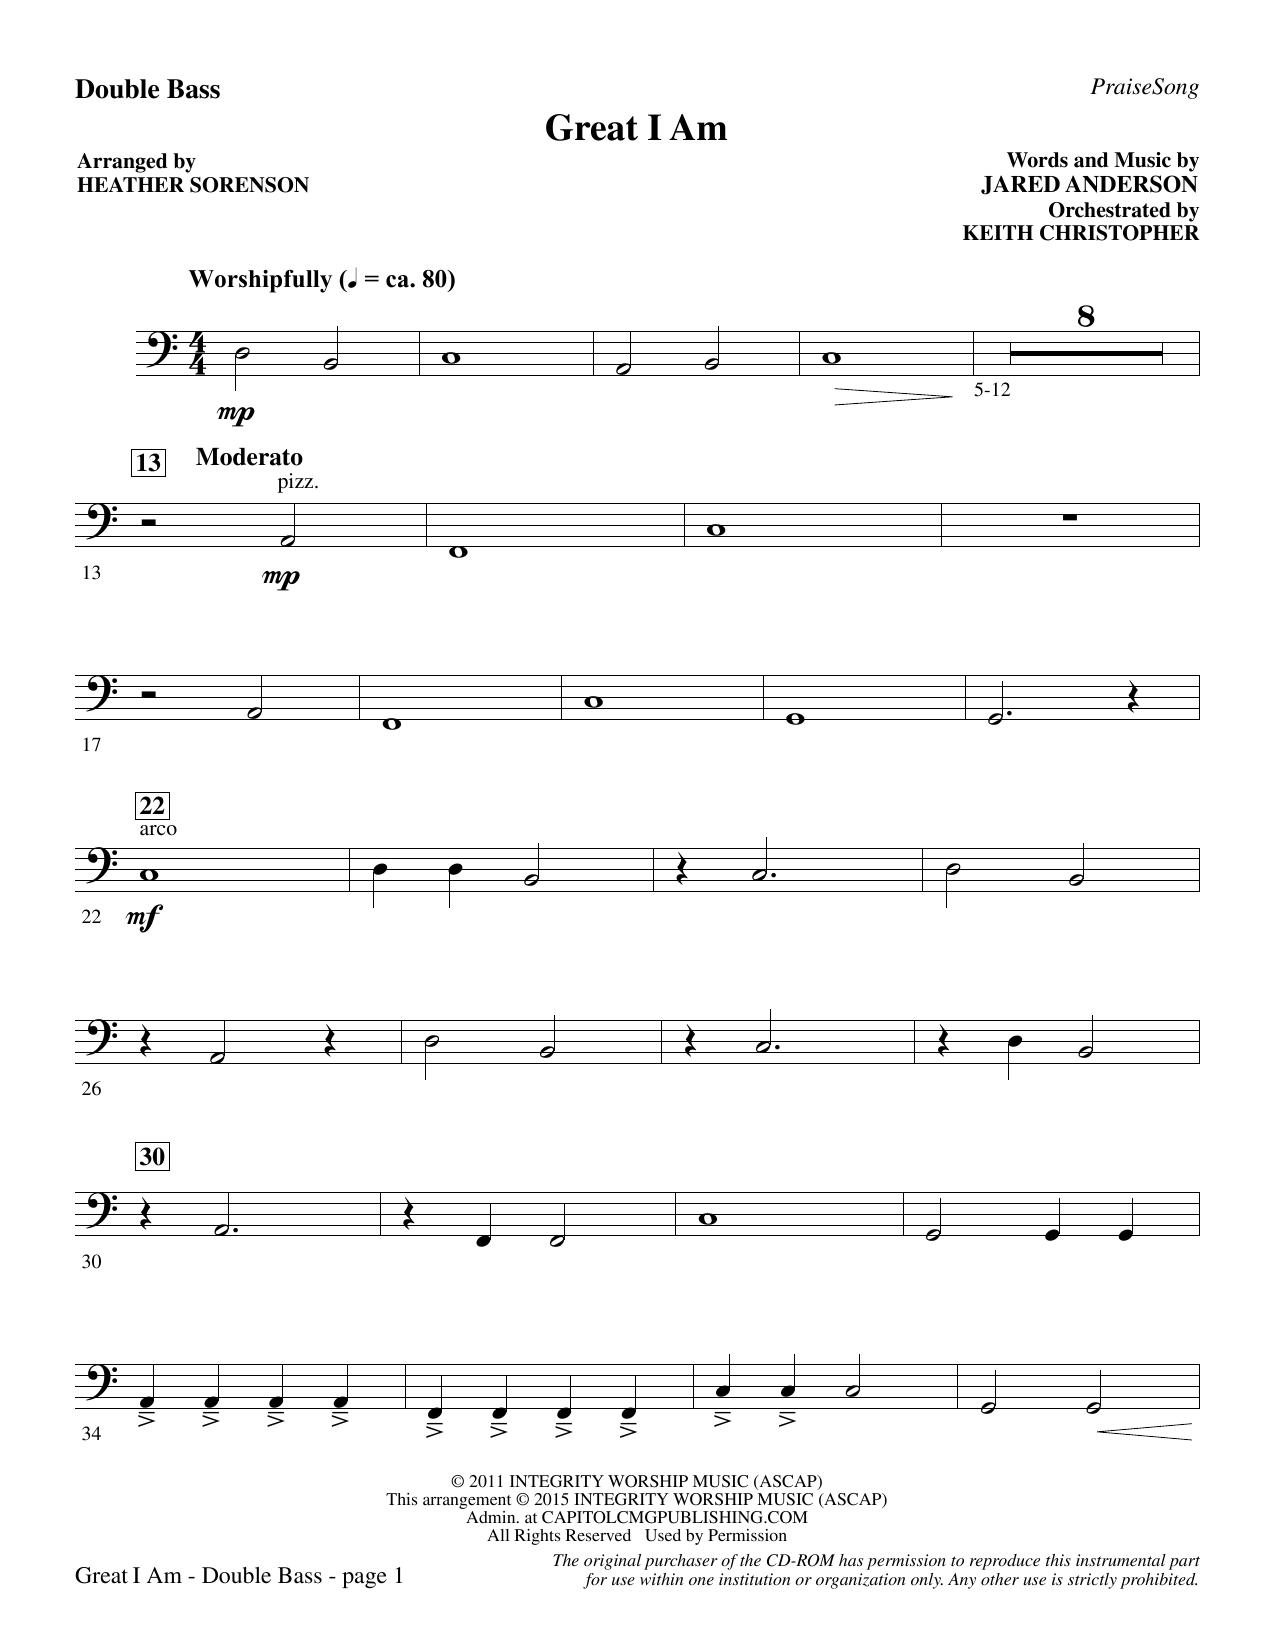 Heather Sorenson Great I Am - Double Bass sheet music notes and chords. Download Printable PDF.